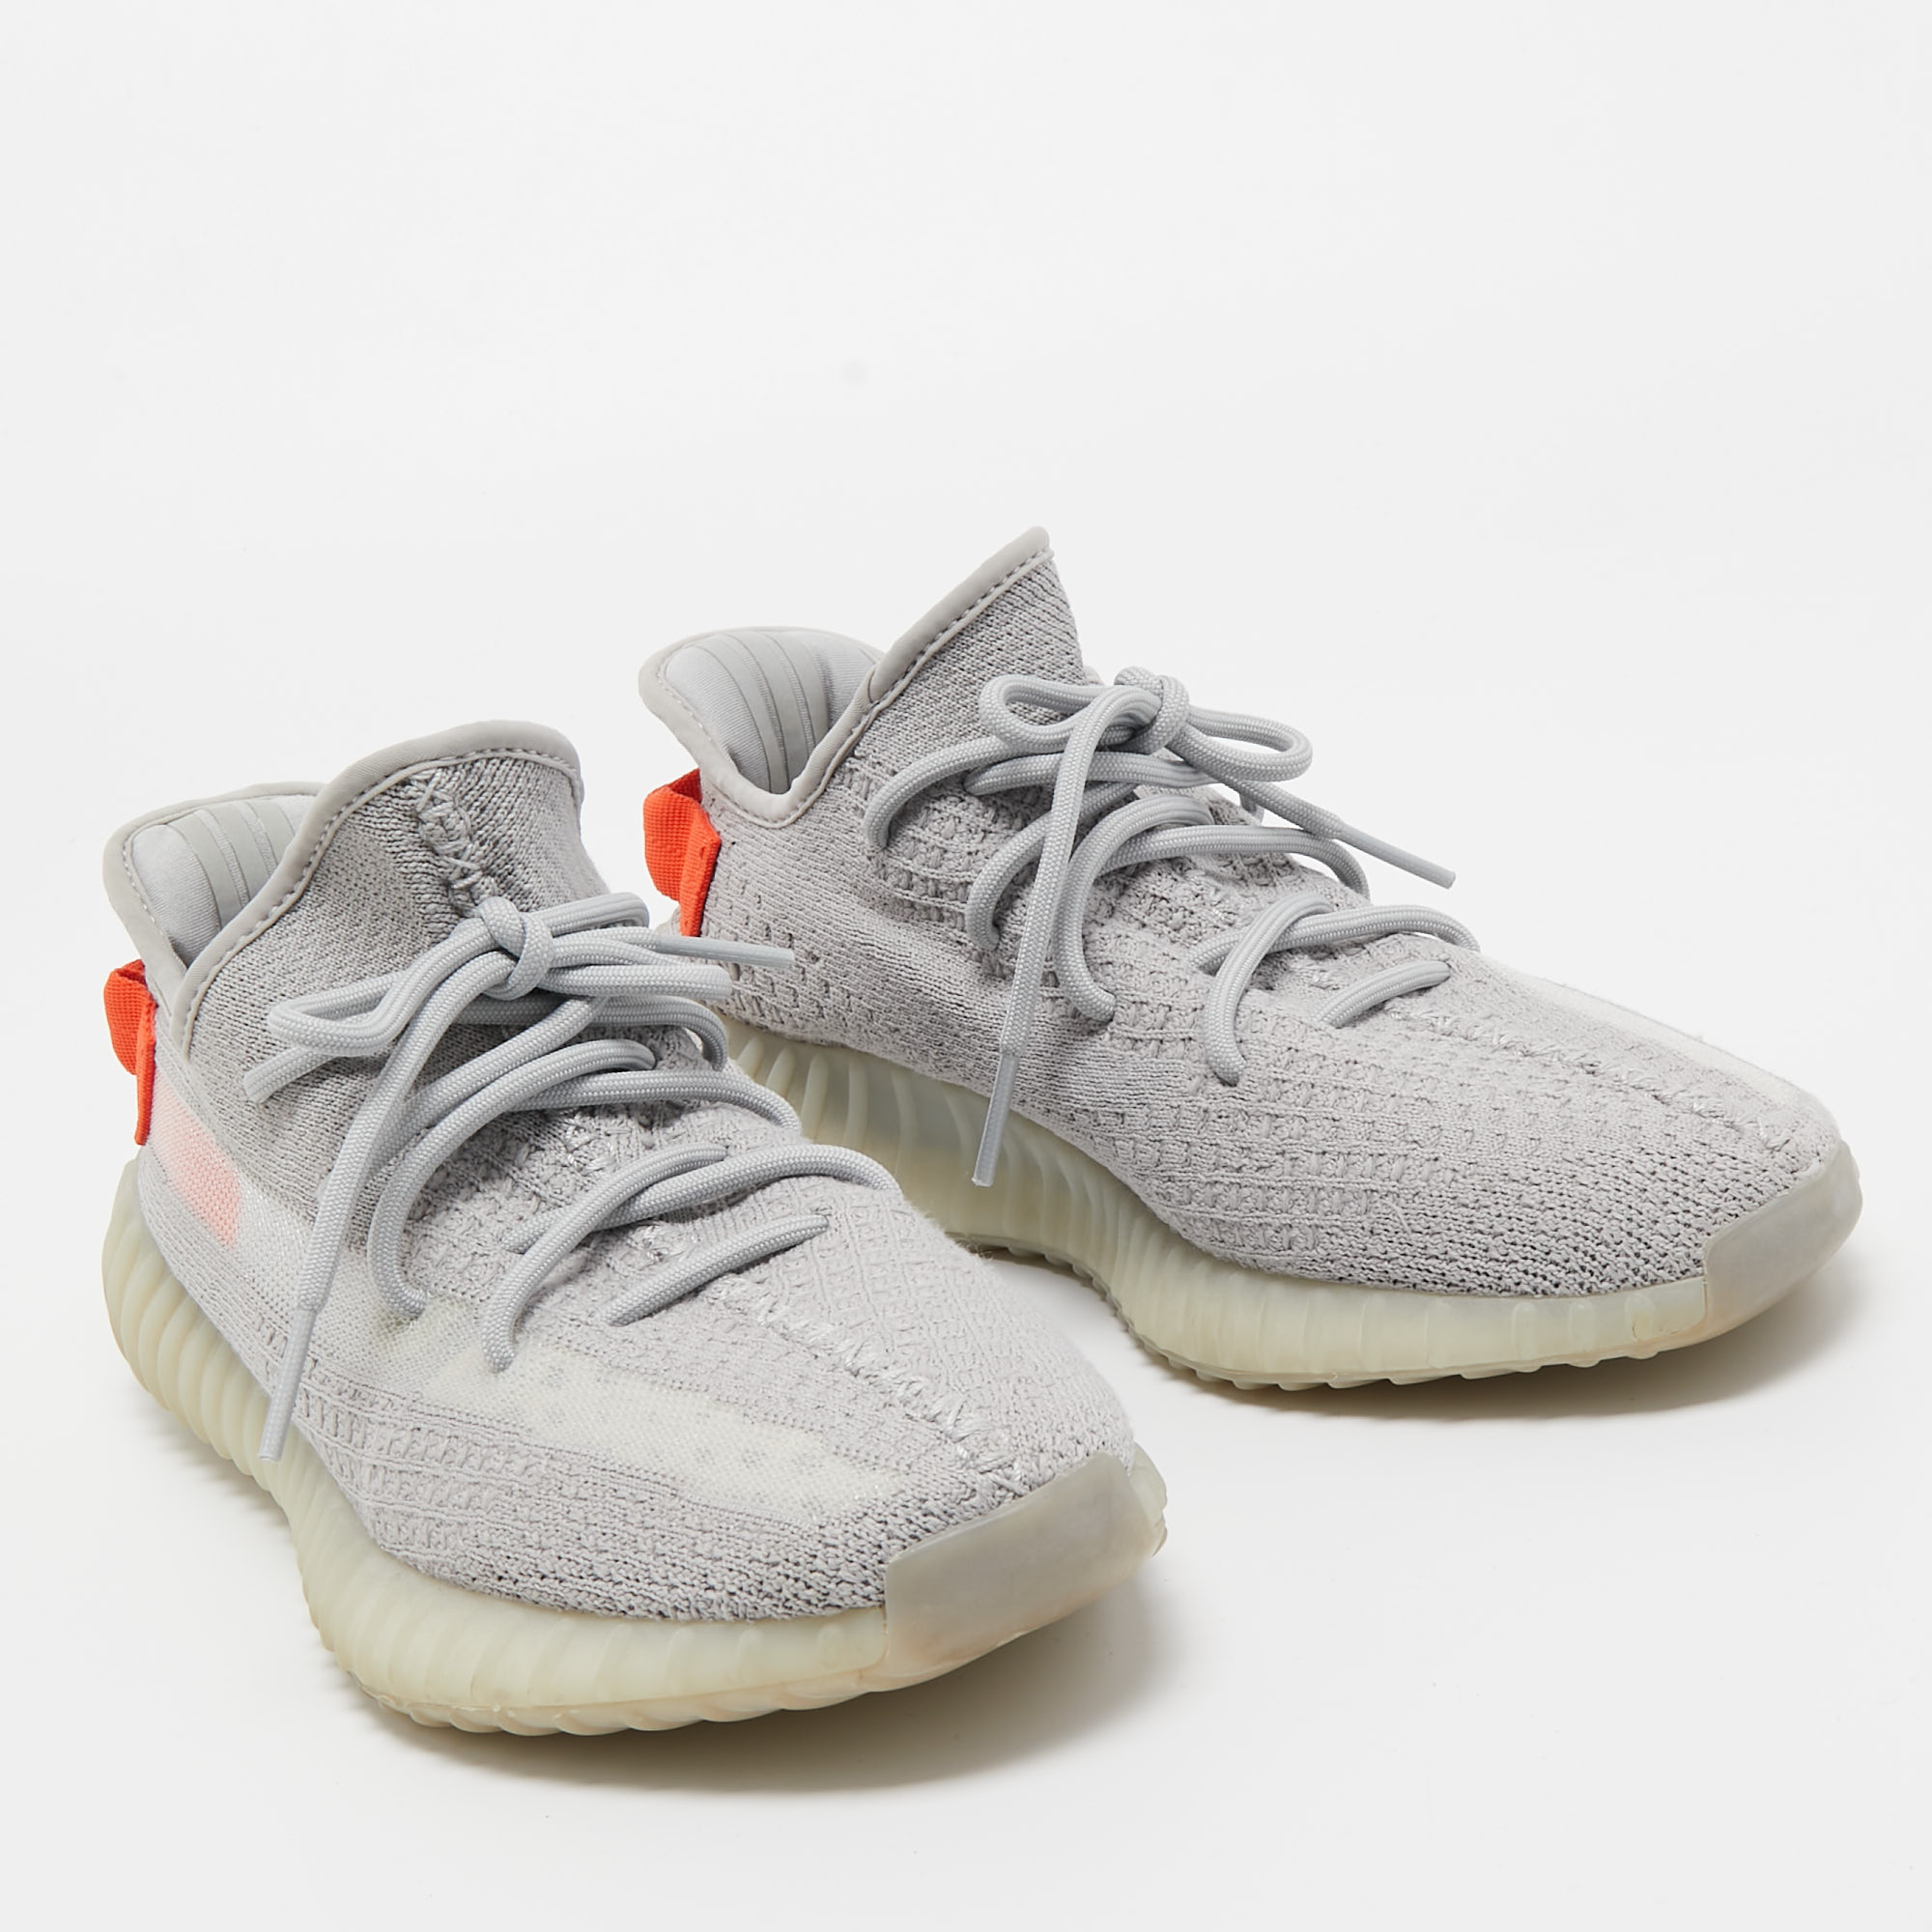 Adidas X Yeezy Grey Knit Fabric Boost-350-v2-tail-light Sneakers Size 43 1/3